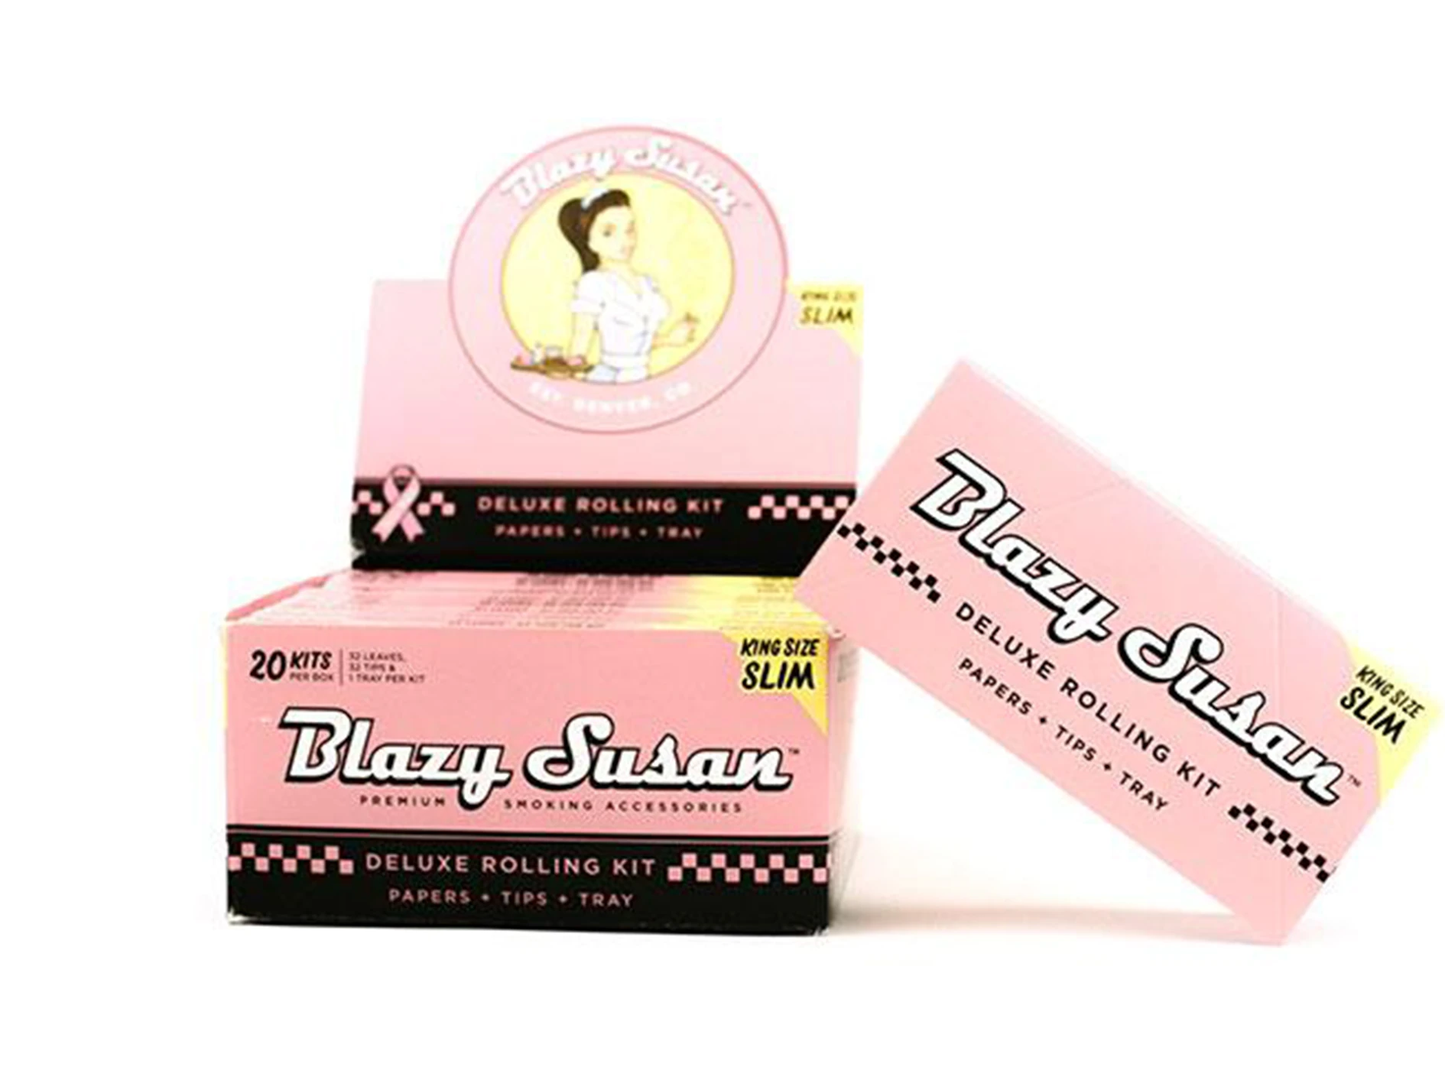 Blazy Susan - Pink, Deluxe Rolling Kit, King Size Slims (Papers, Tips & Tray)